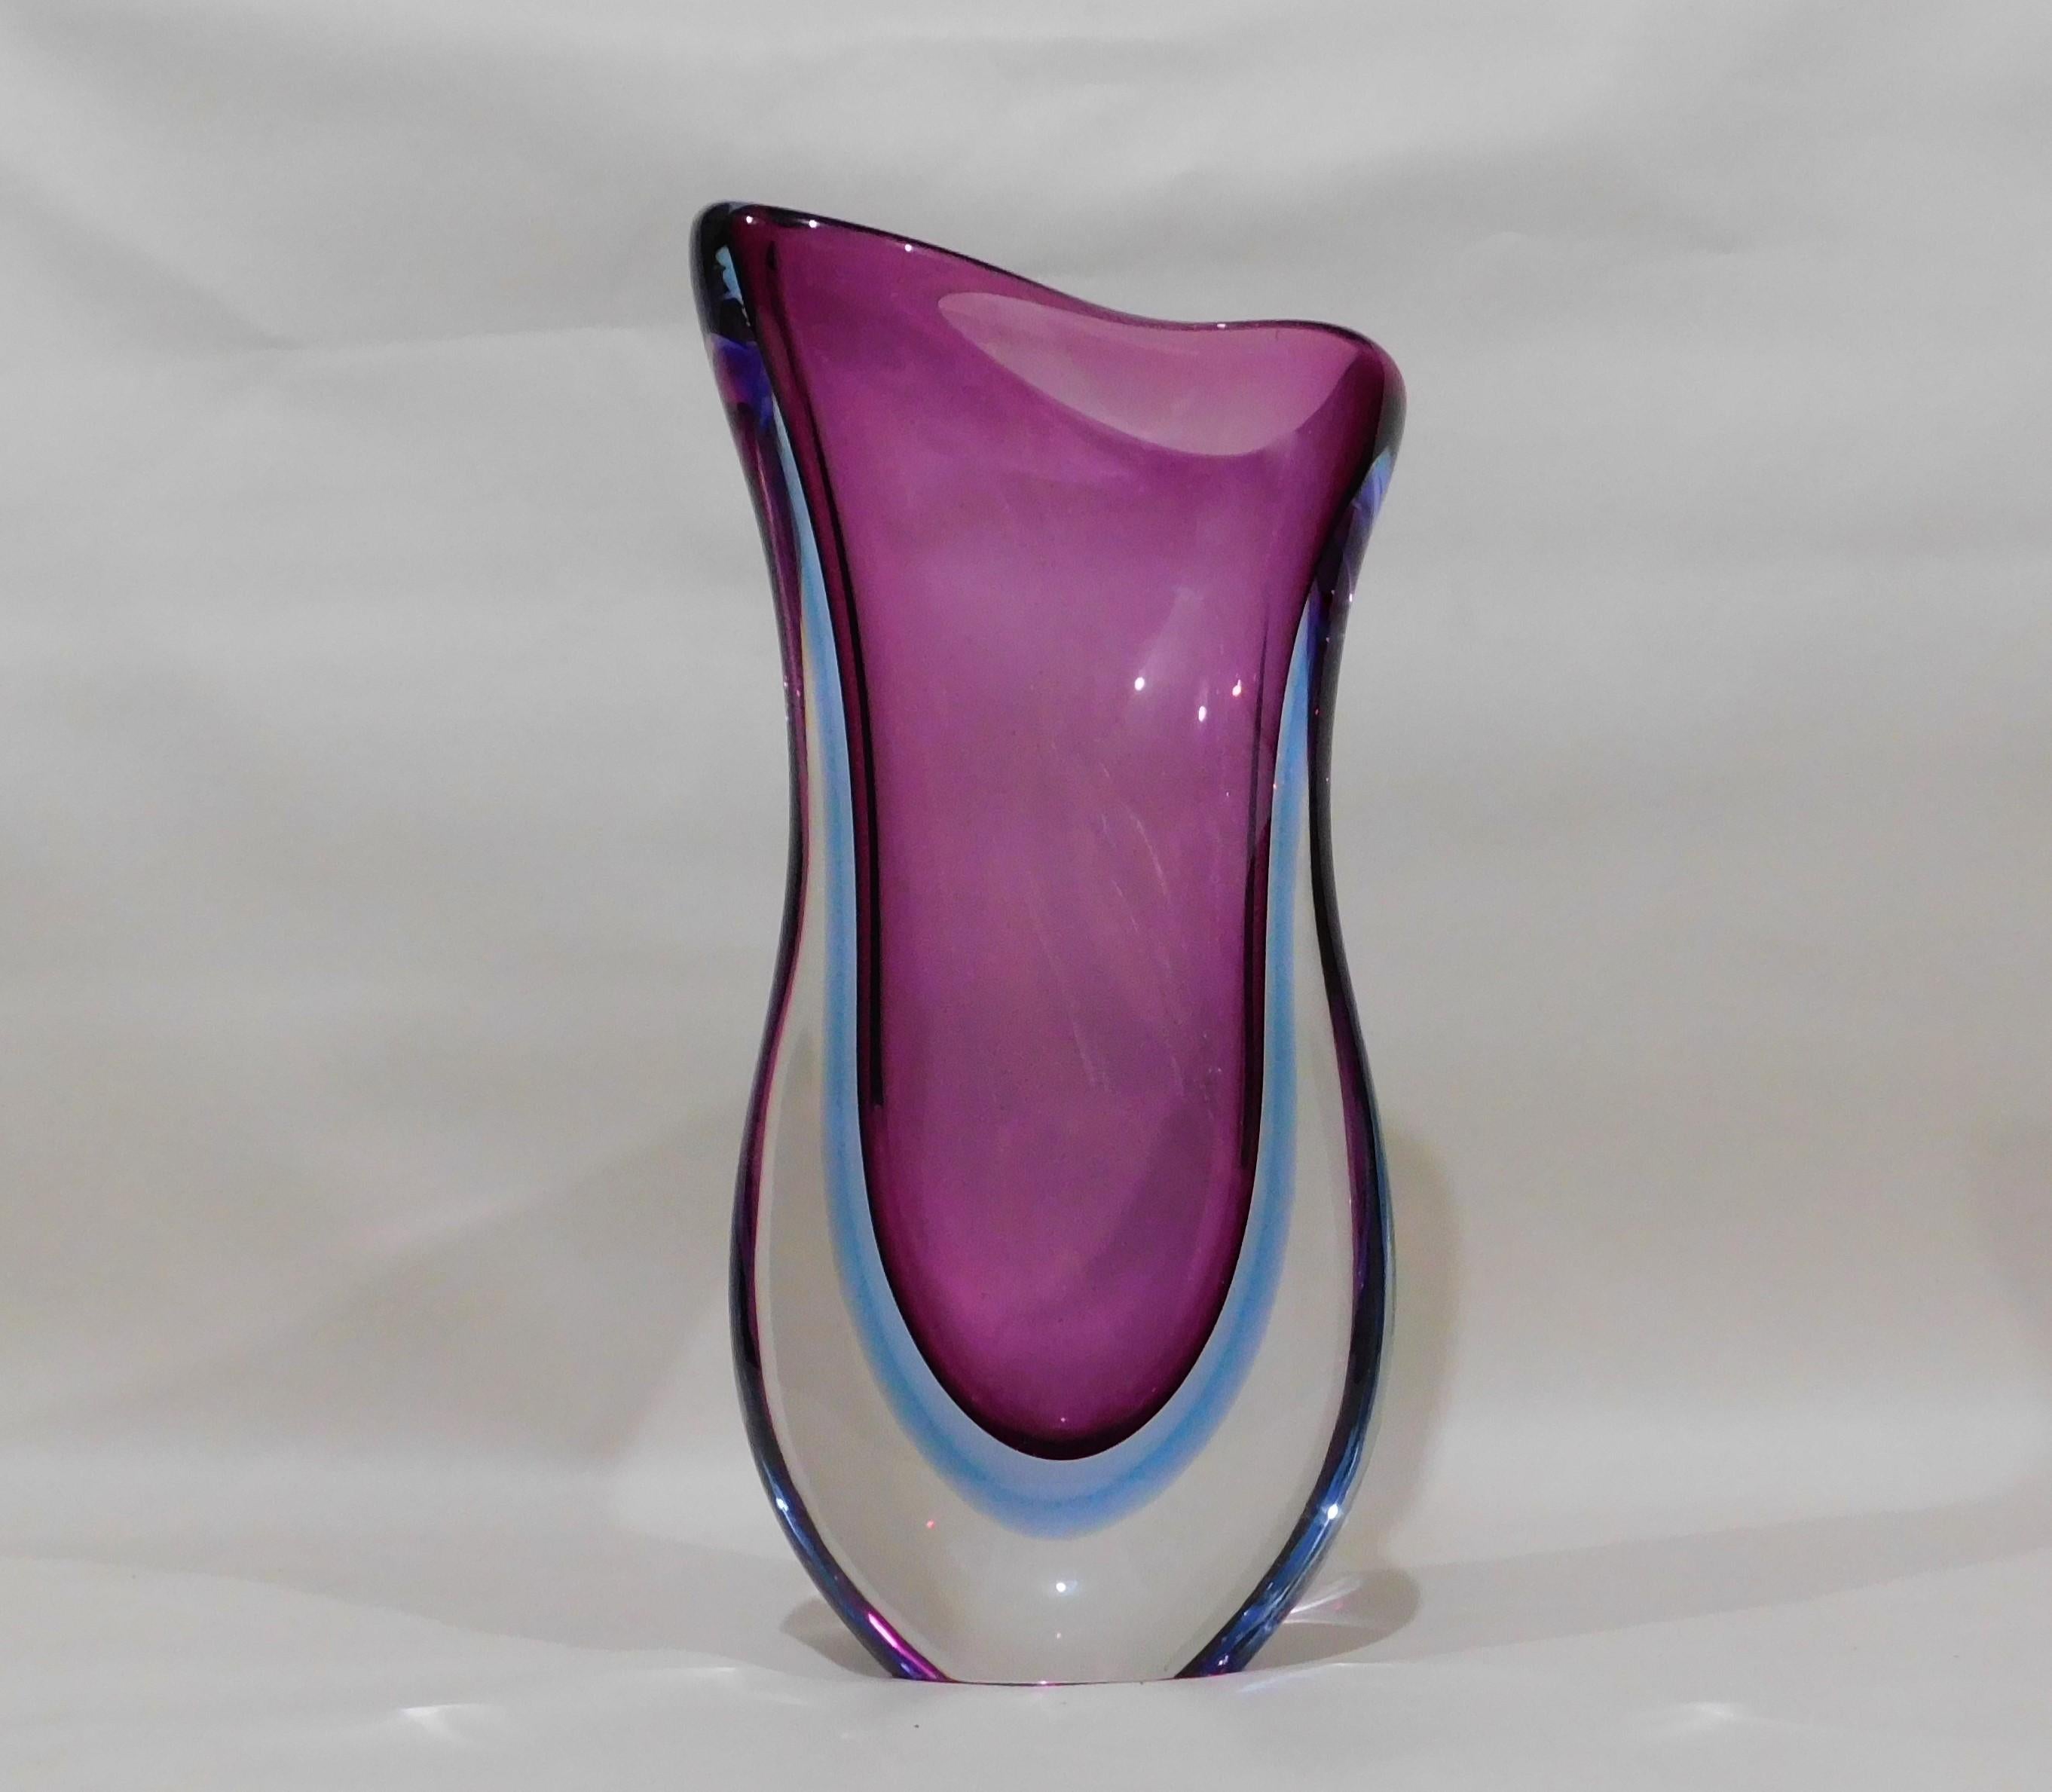 Large and beautiful midcentury Murano Italy hand blown purple/violet and blue toned encased in a thick clear glass overlay art glass flower vase. Attributed to designer Archimede Seguso, circa 1960. Measure: 14 inches high.